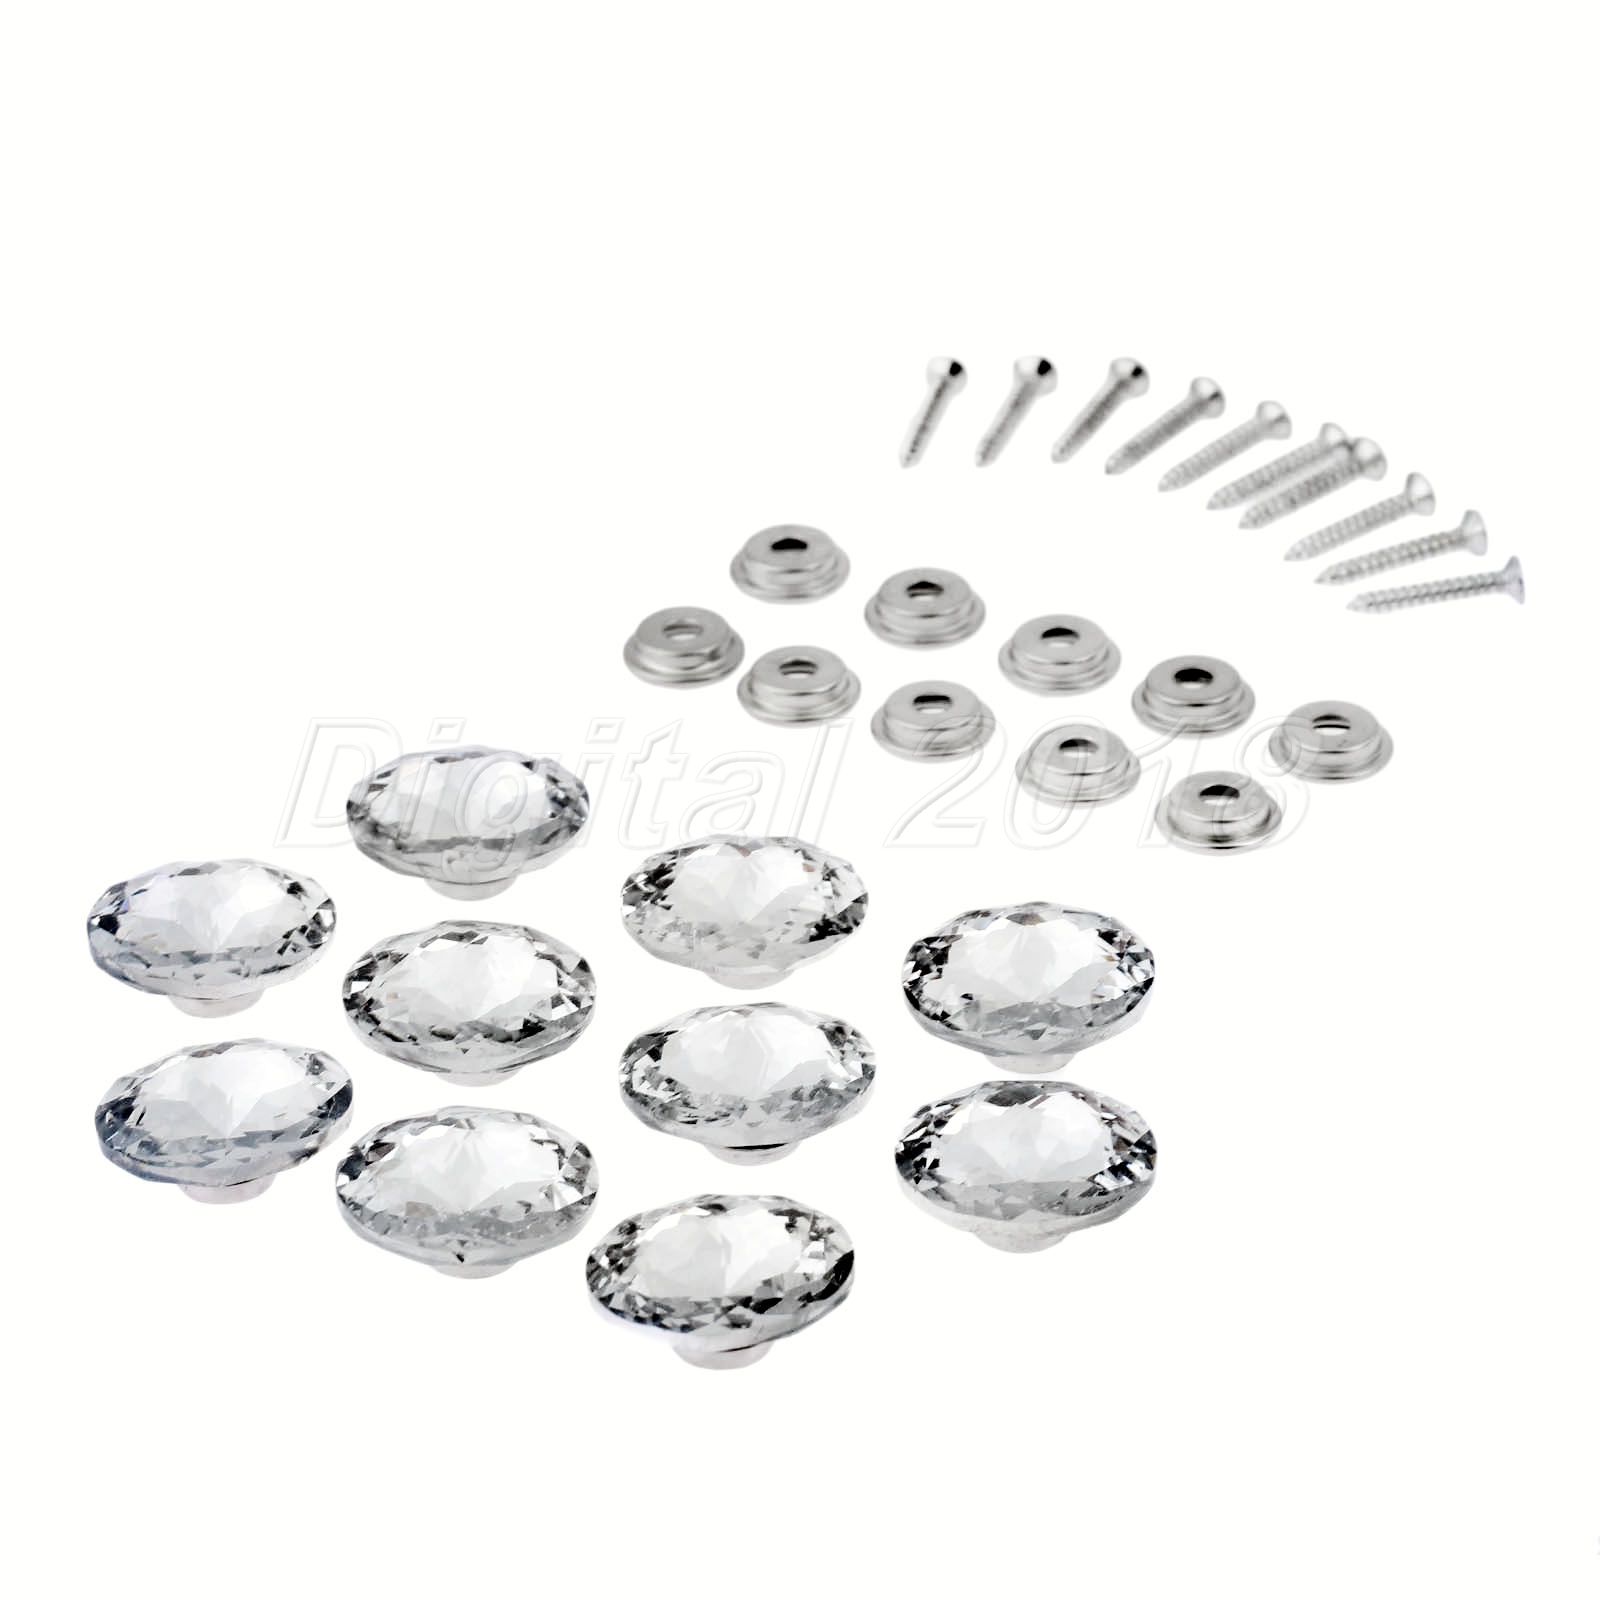 10Pcs 3 Size Metal & Glass Crystal Upholstery Nails Tacks Shiny Sew Button Screw